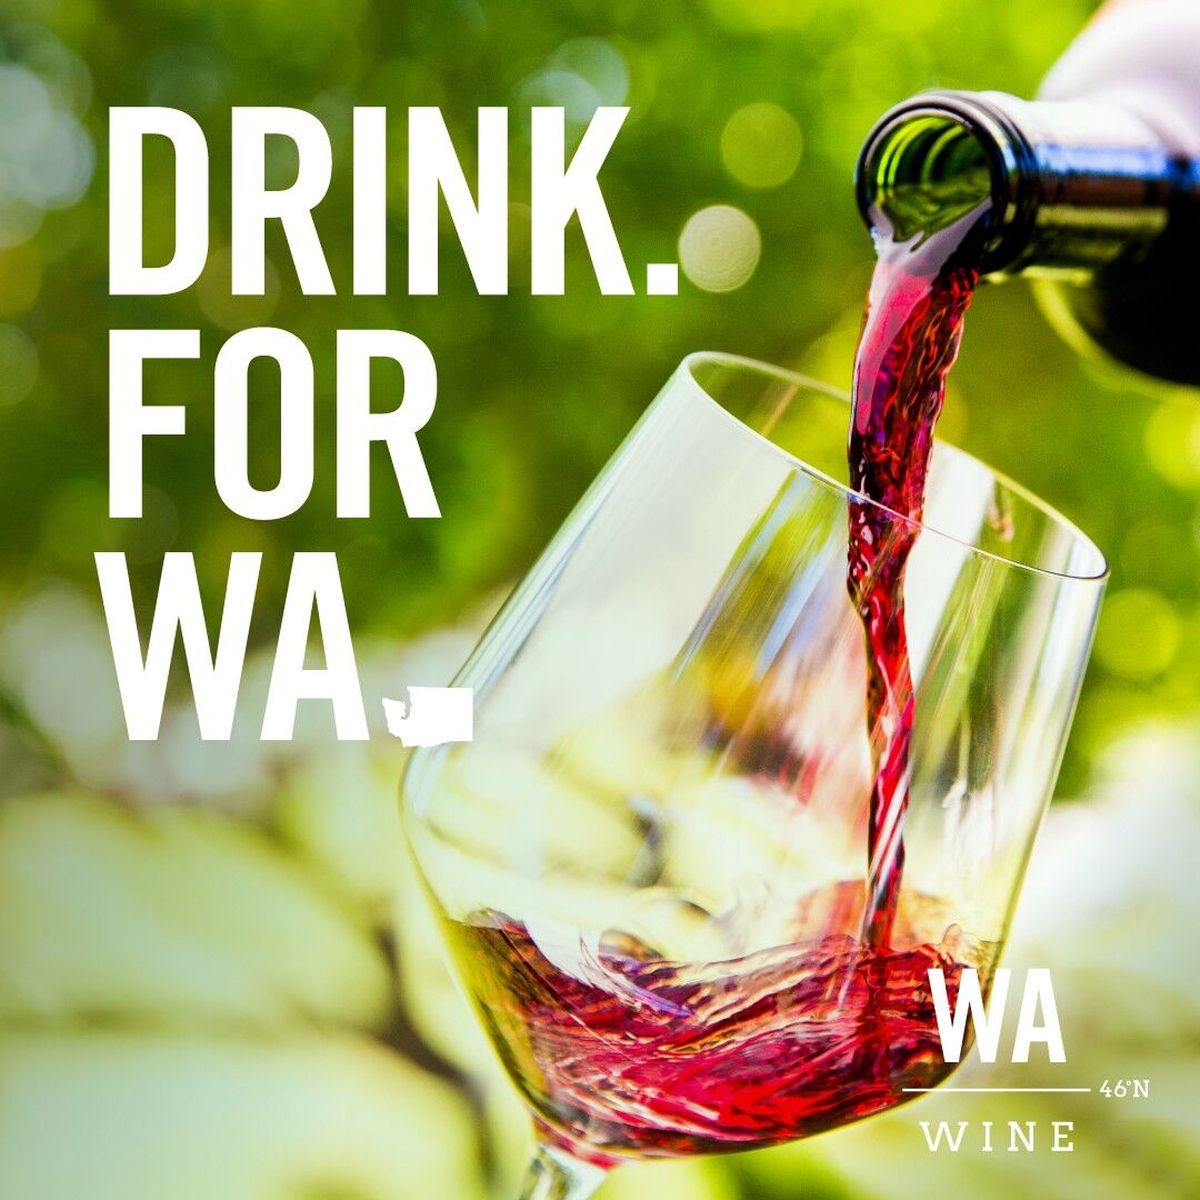 The Washington State Wine Commission is using August, known for decades as Washington Wine Month, to promote the Drink for WA campaign.  (Washington State Wine Commission)